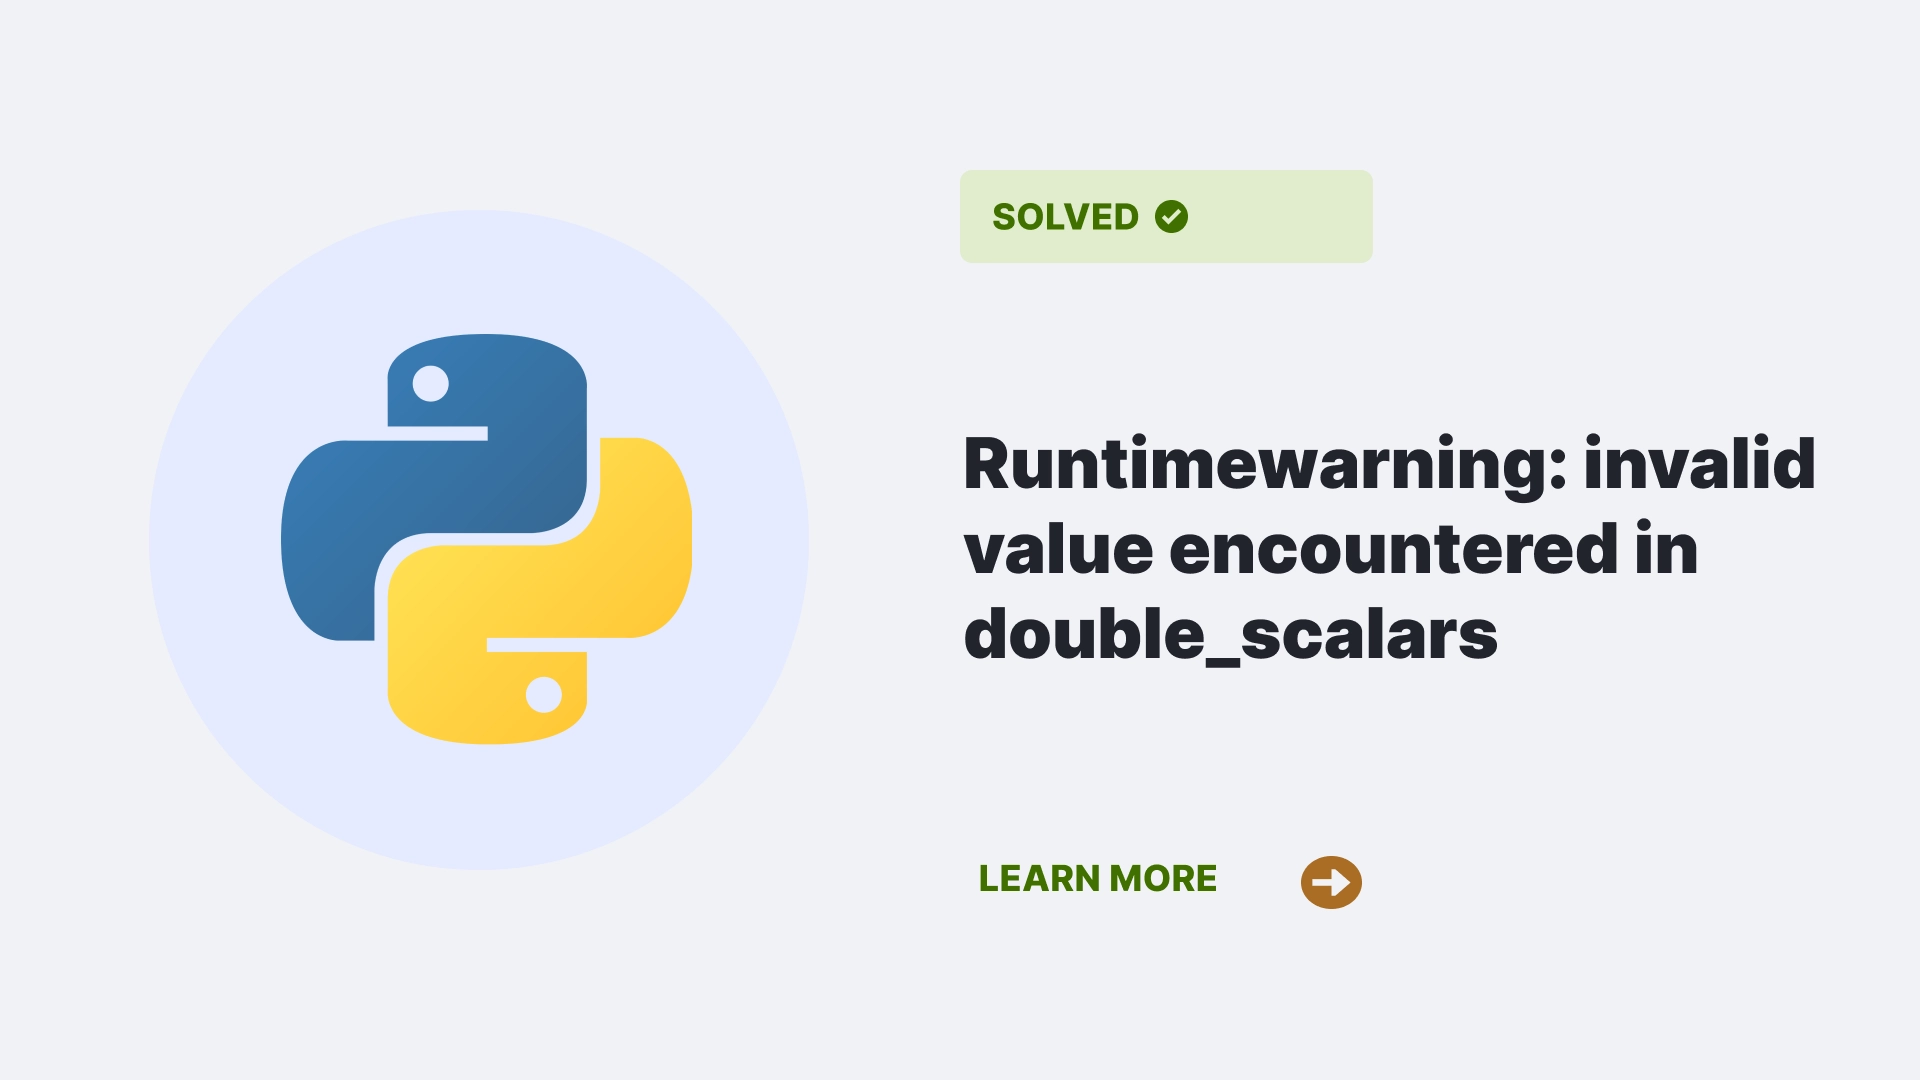 Runtimewarning- invalid value encountered in double_scalars